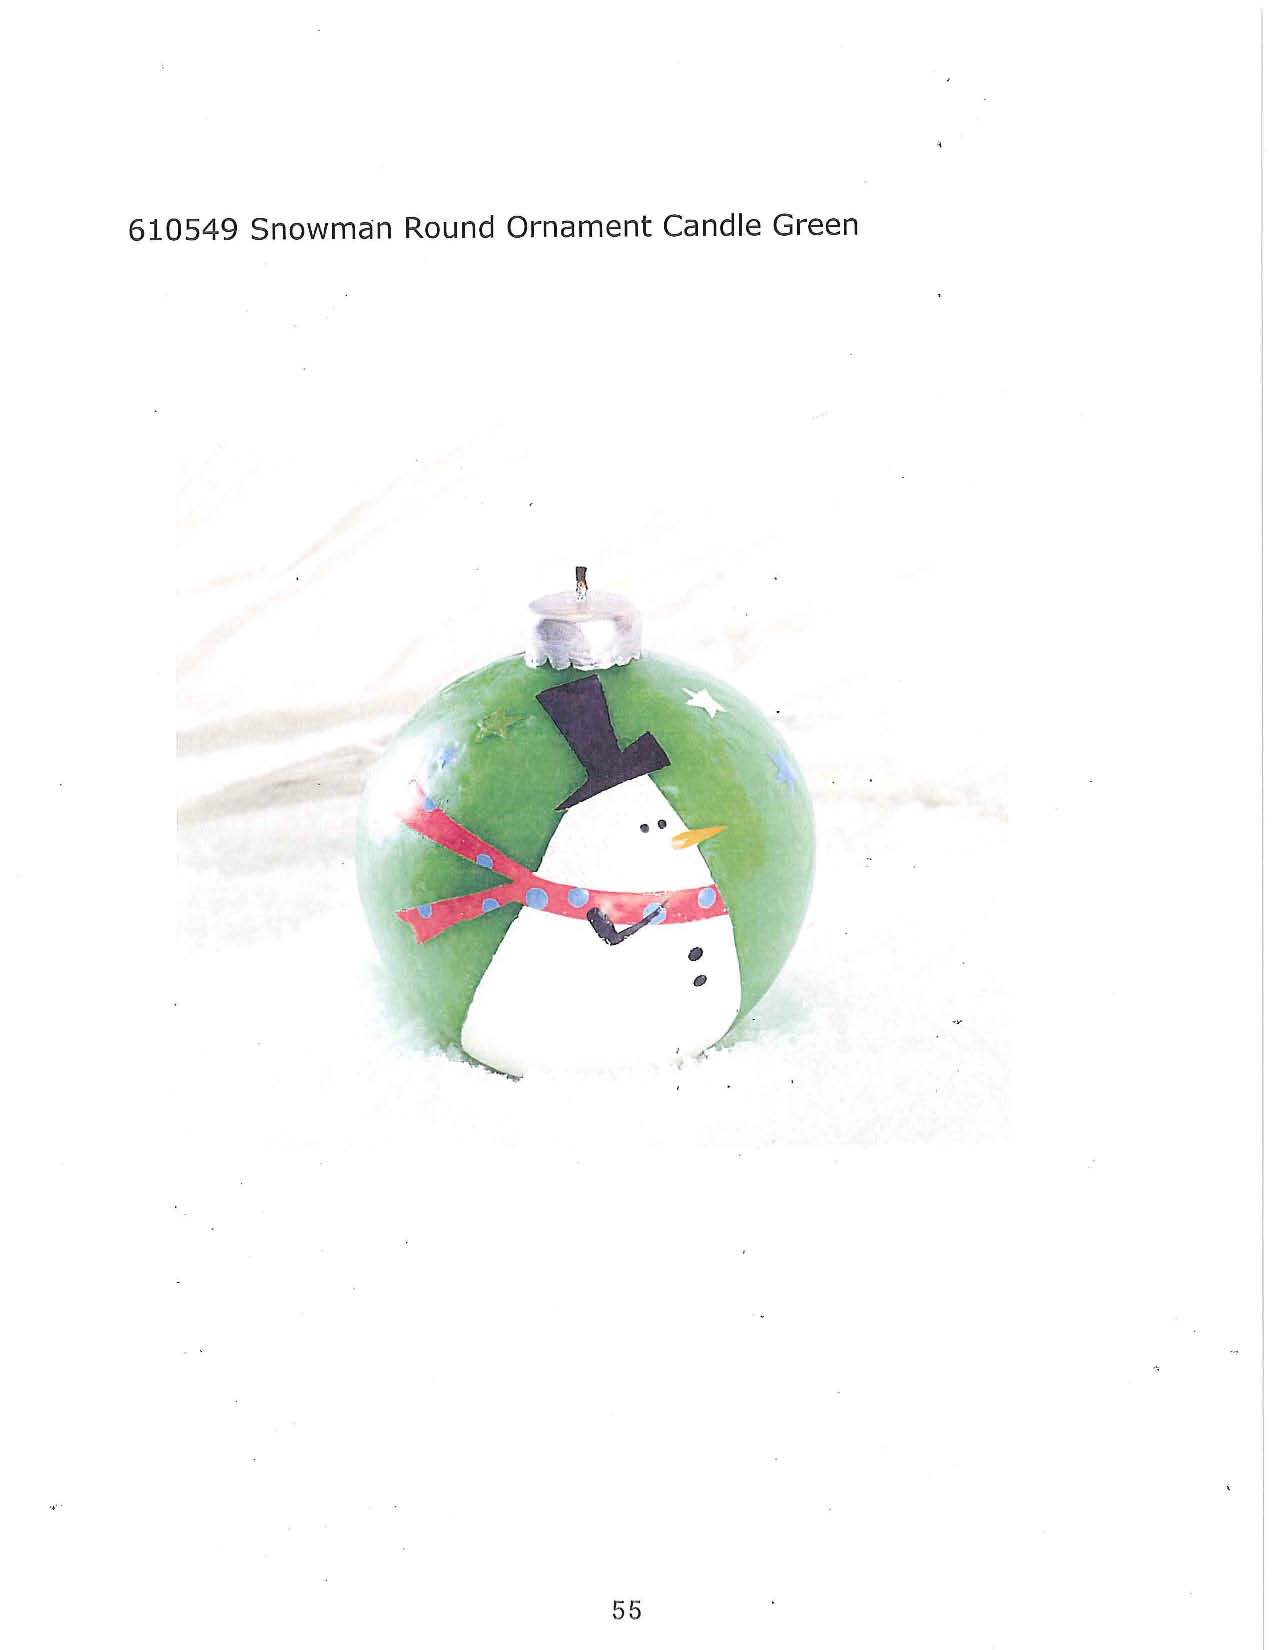 Snowman Round Ornament Candle - Green